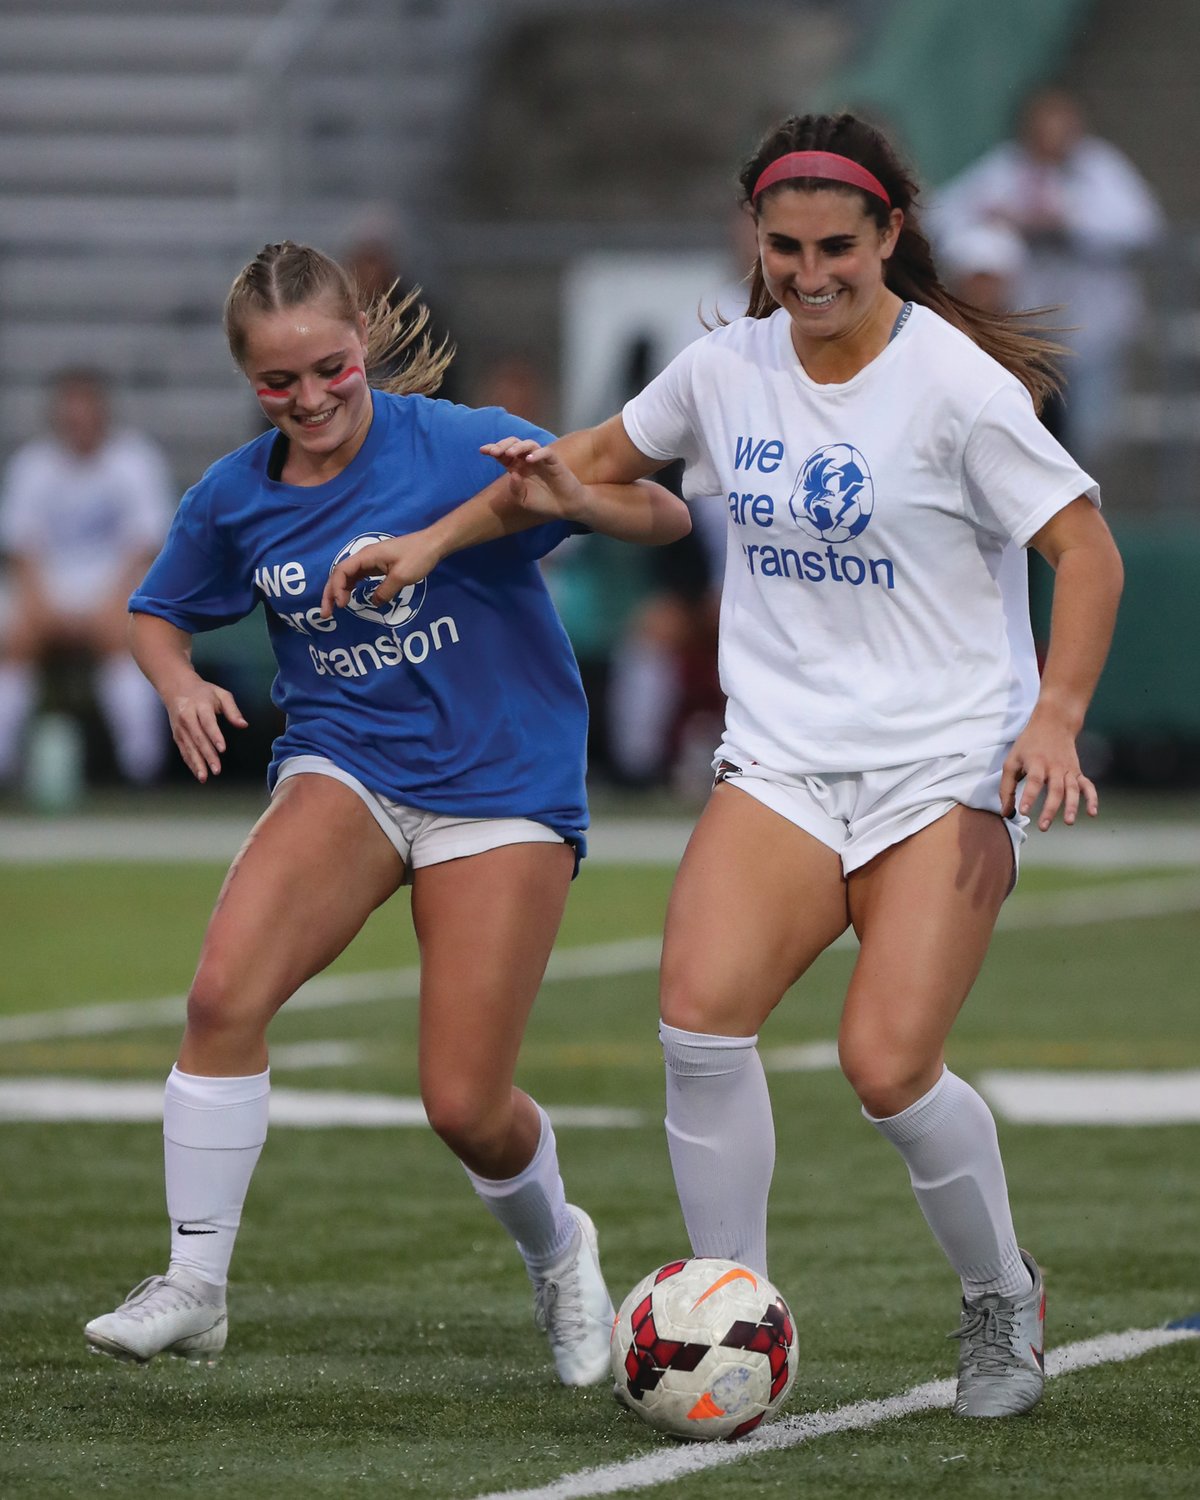 BATTLING: Cranston
East’s Savanna Lavimodiere
(left) and West’s
Maddie Alves (right) battle for the ball during the City Cup last week.